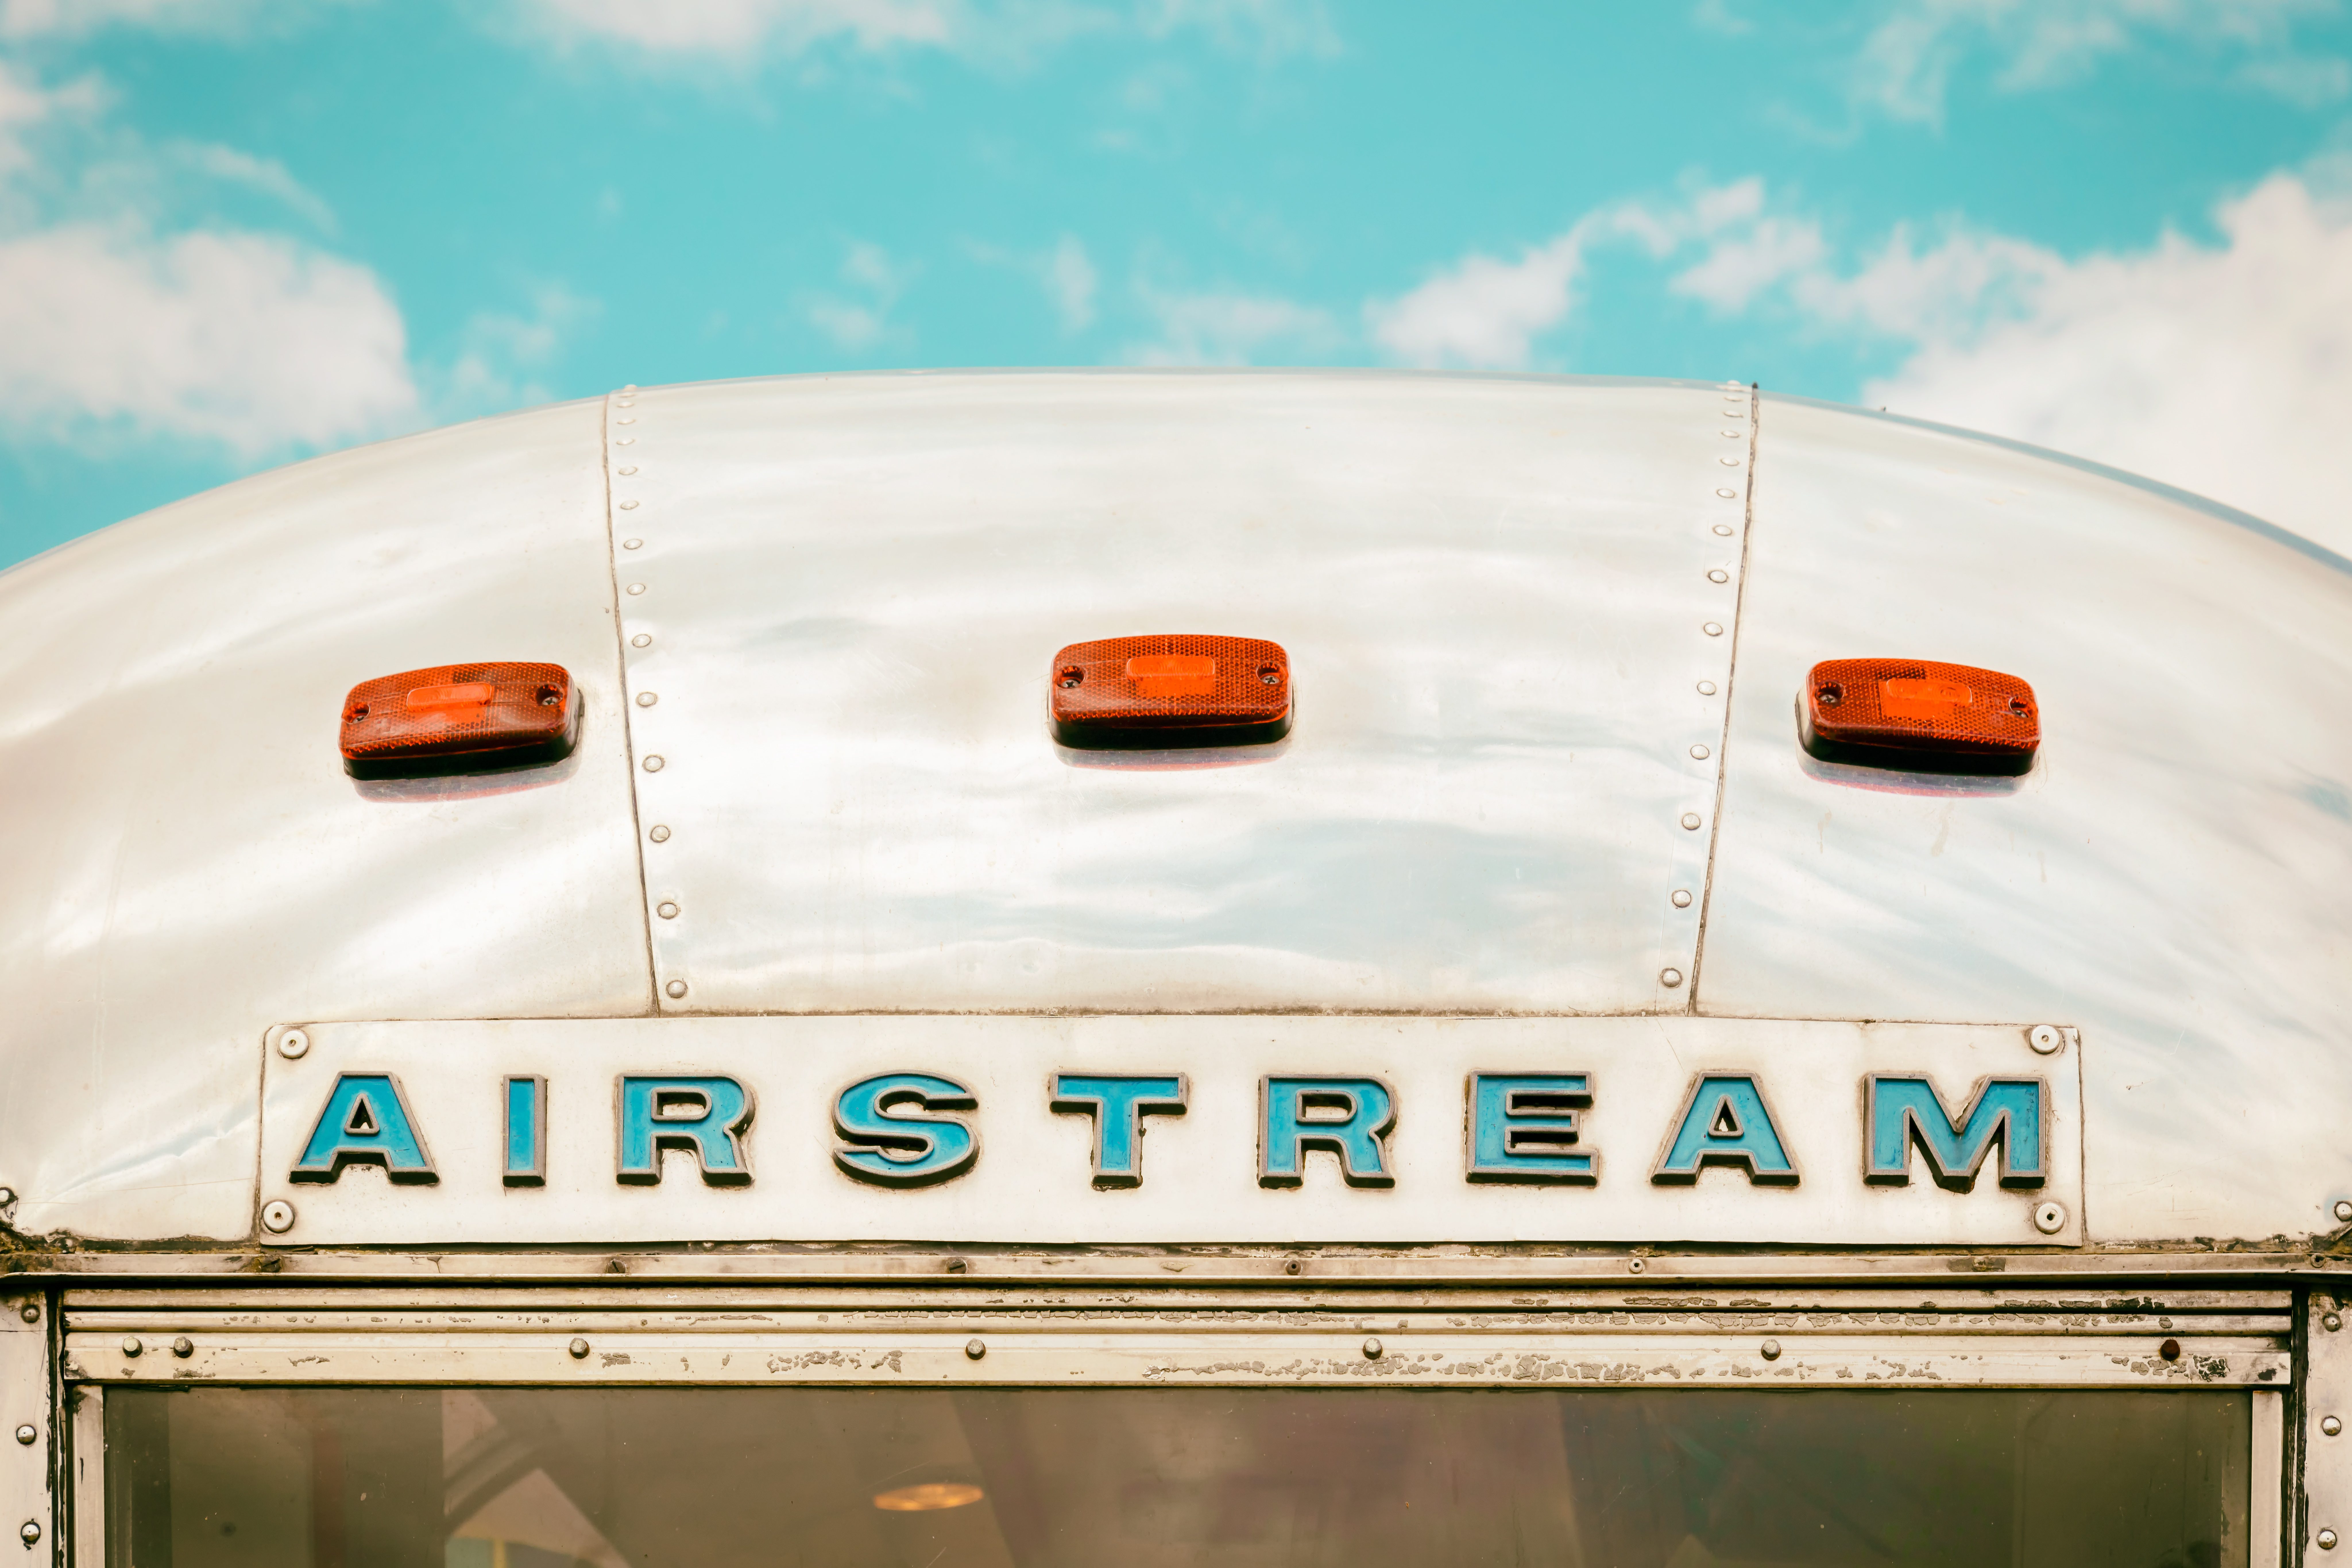 Airstream Trailers Are Great, But Do They Have Challenges?